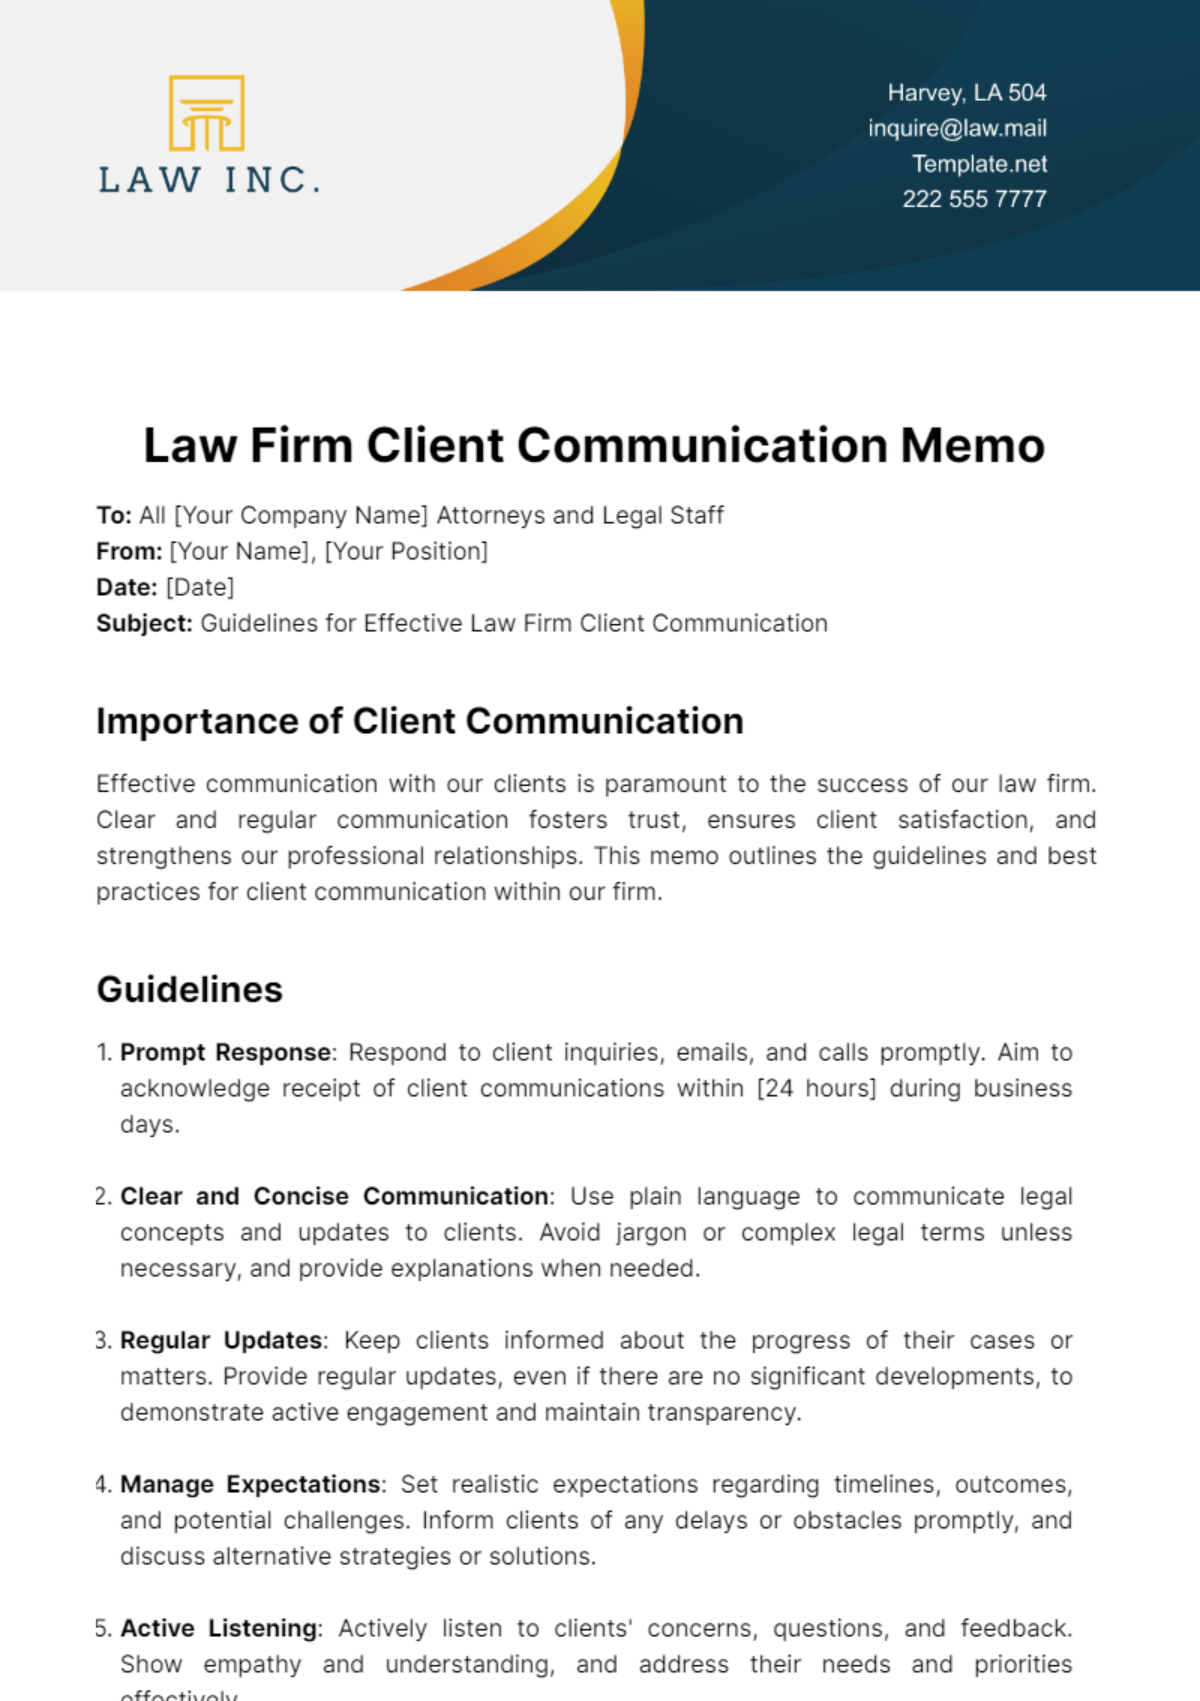 Free Law Firm Client Communication Memo Template